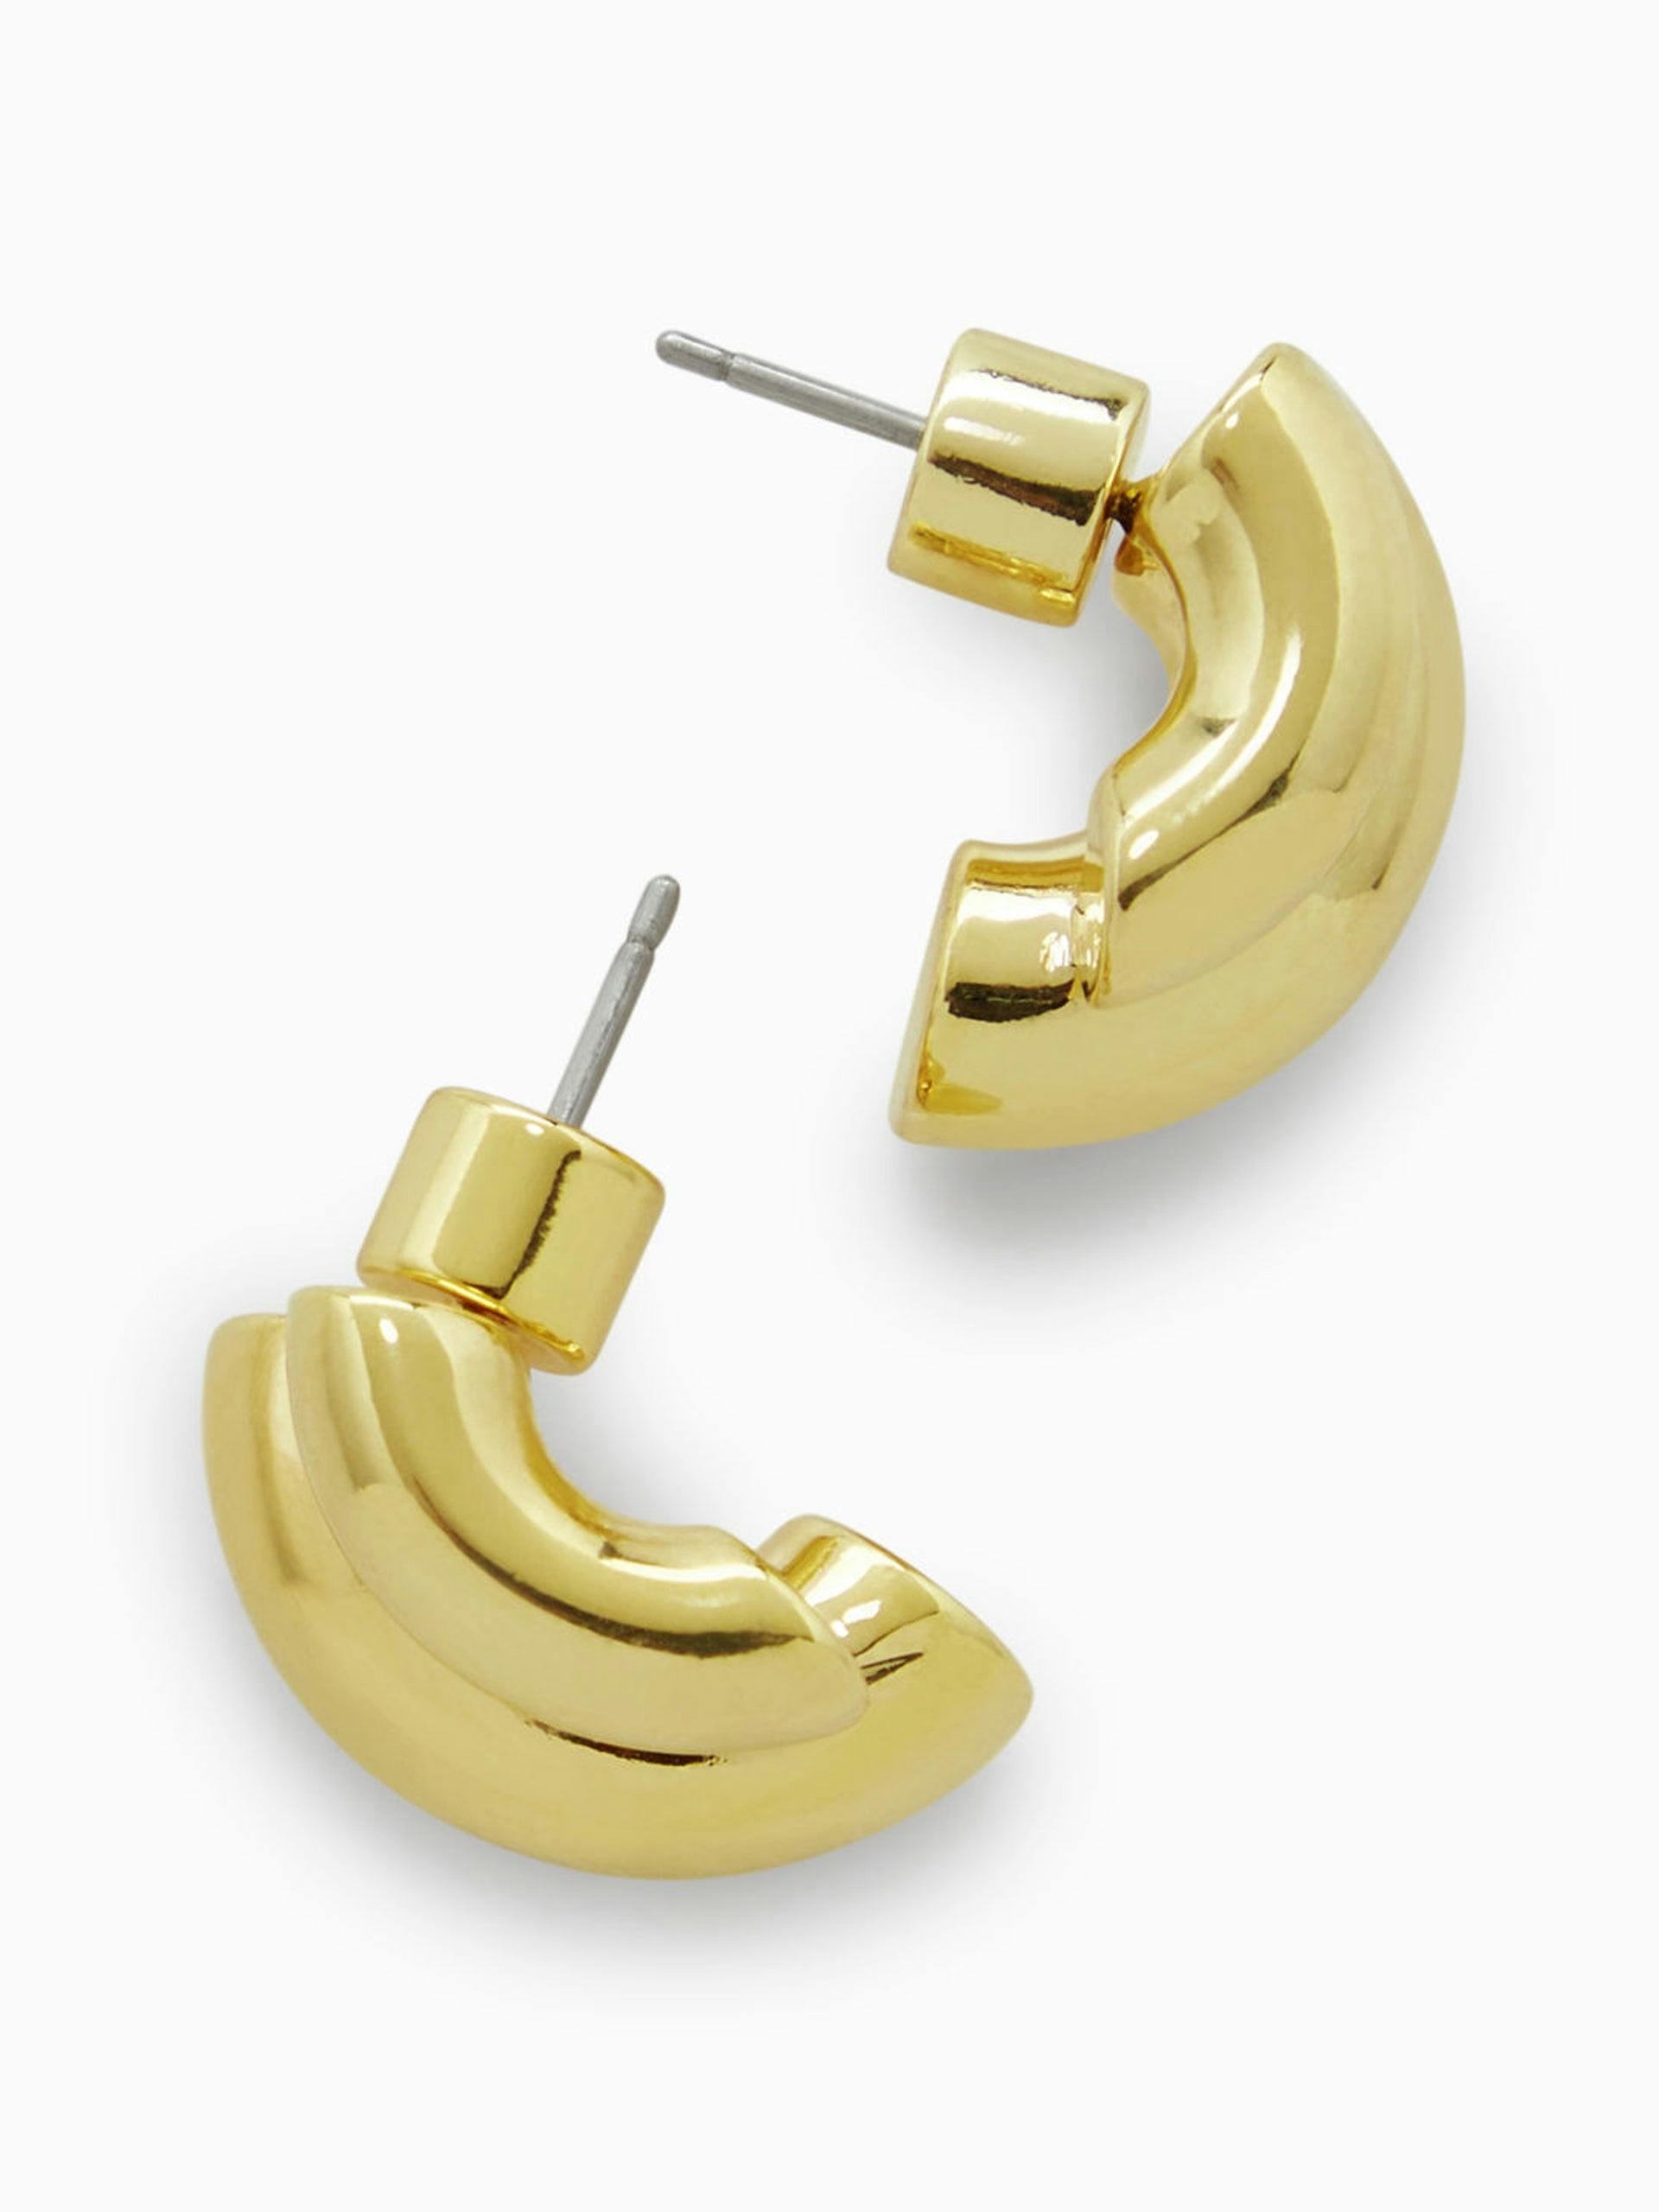 Layered gold stud earrings